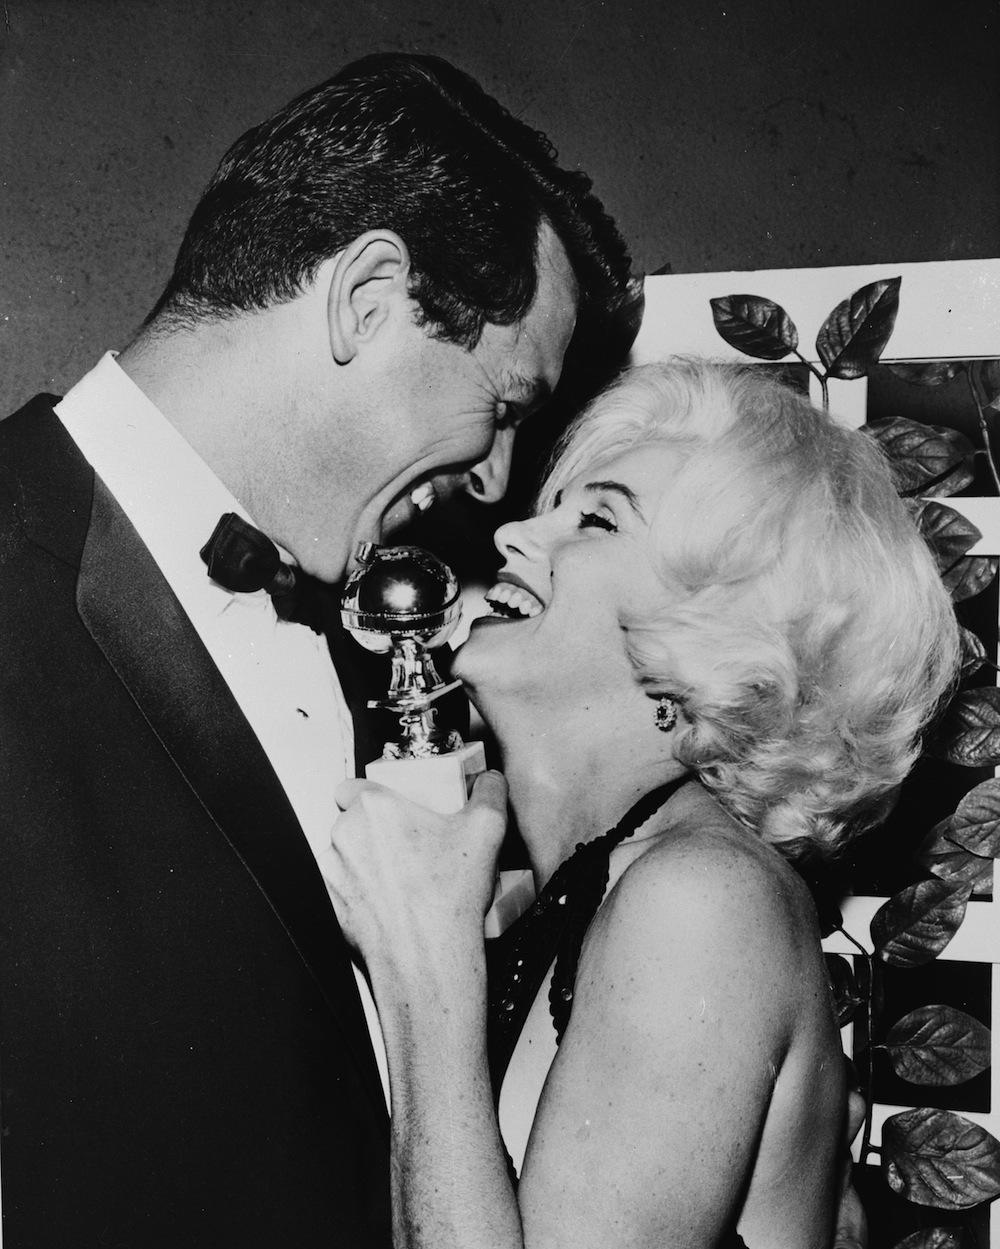 13th March 1962:  Marilyn Monroe (Norma Jean Mortenson or Norma Jean Baker, 1926 - 1962) receives her Golden Globe award from Rock Hudson (1925 - 1985) at the Hollywood Foreign Press Association's 19th Annual Dinner.  (Photo by Keystone/Getty Images)